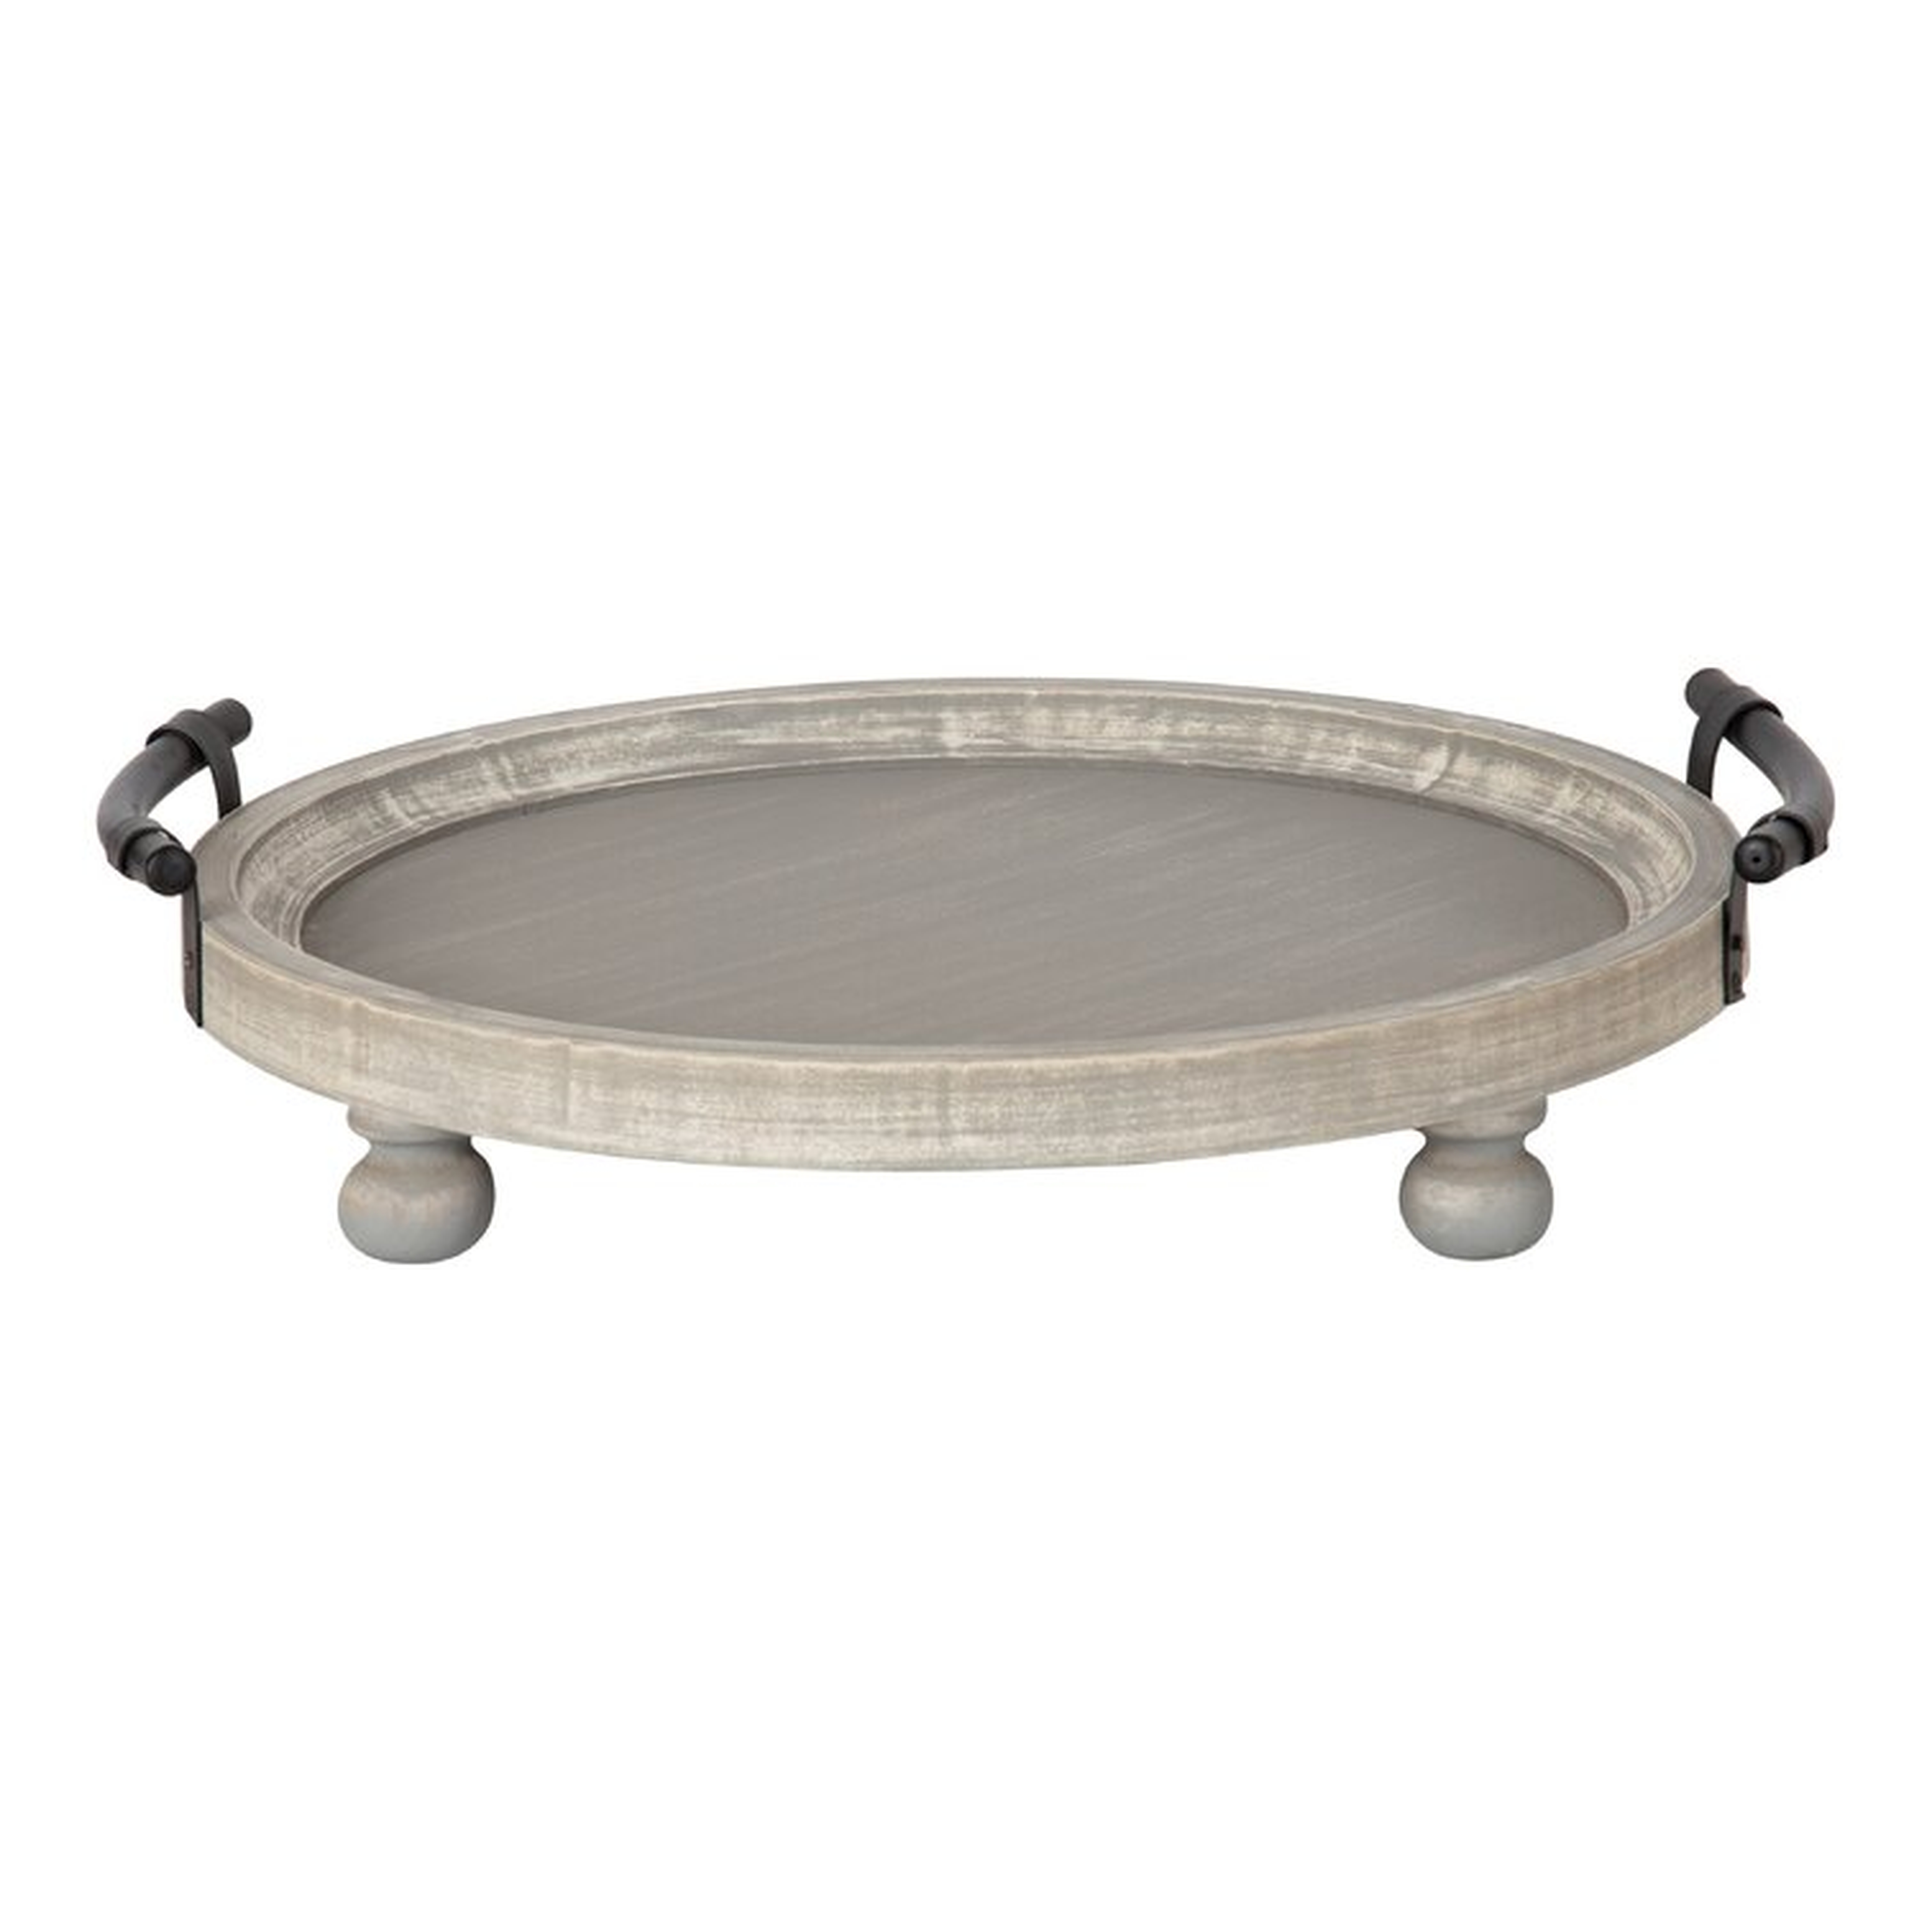 Lucia Round Wooden Footed Coffee Table Tray - Wayfair